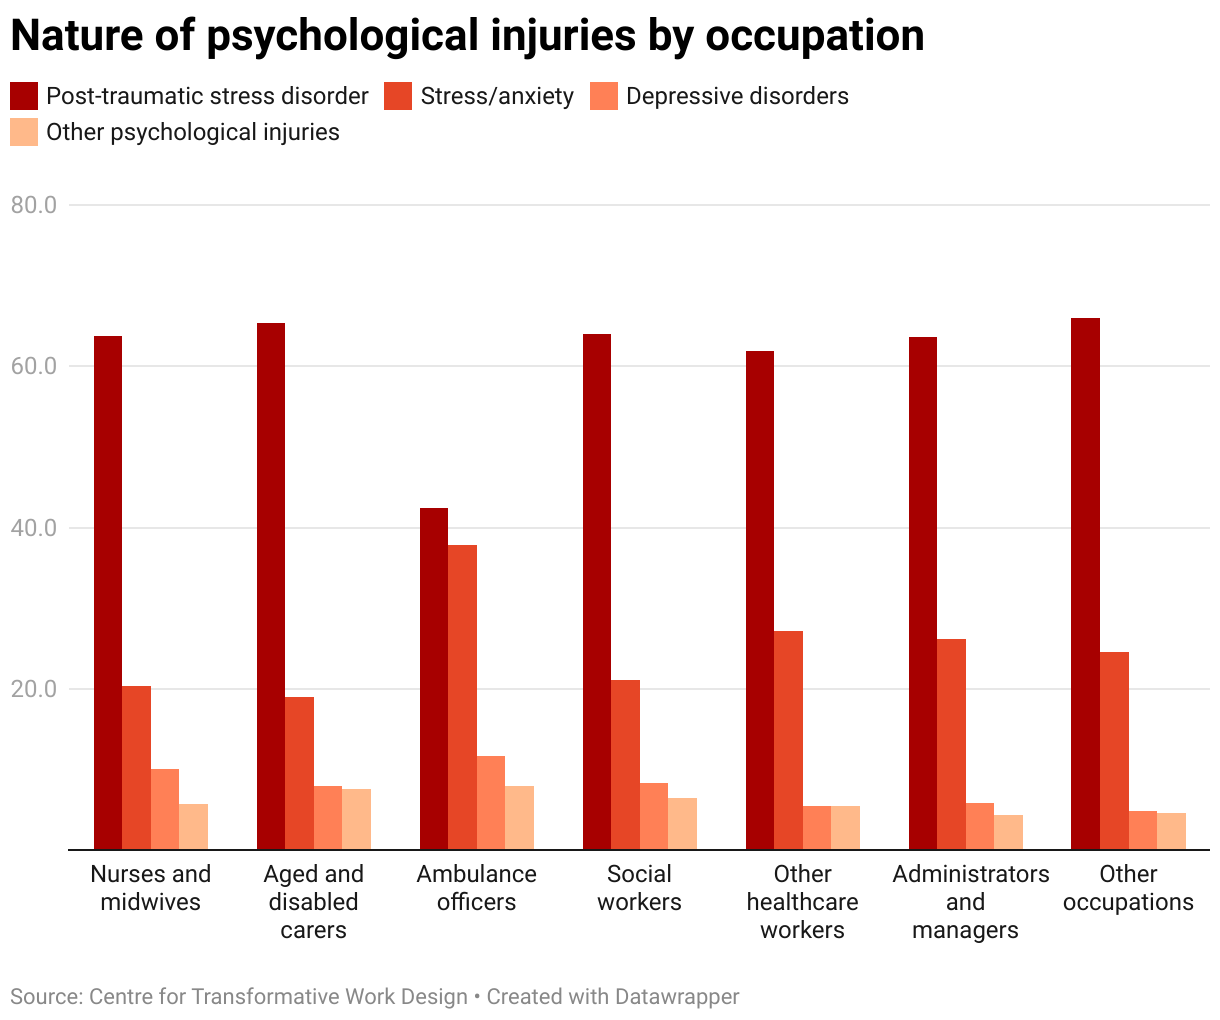 Nature of psychological injuries by occupation